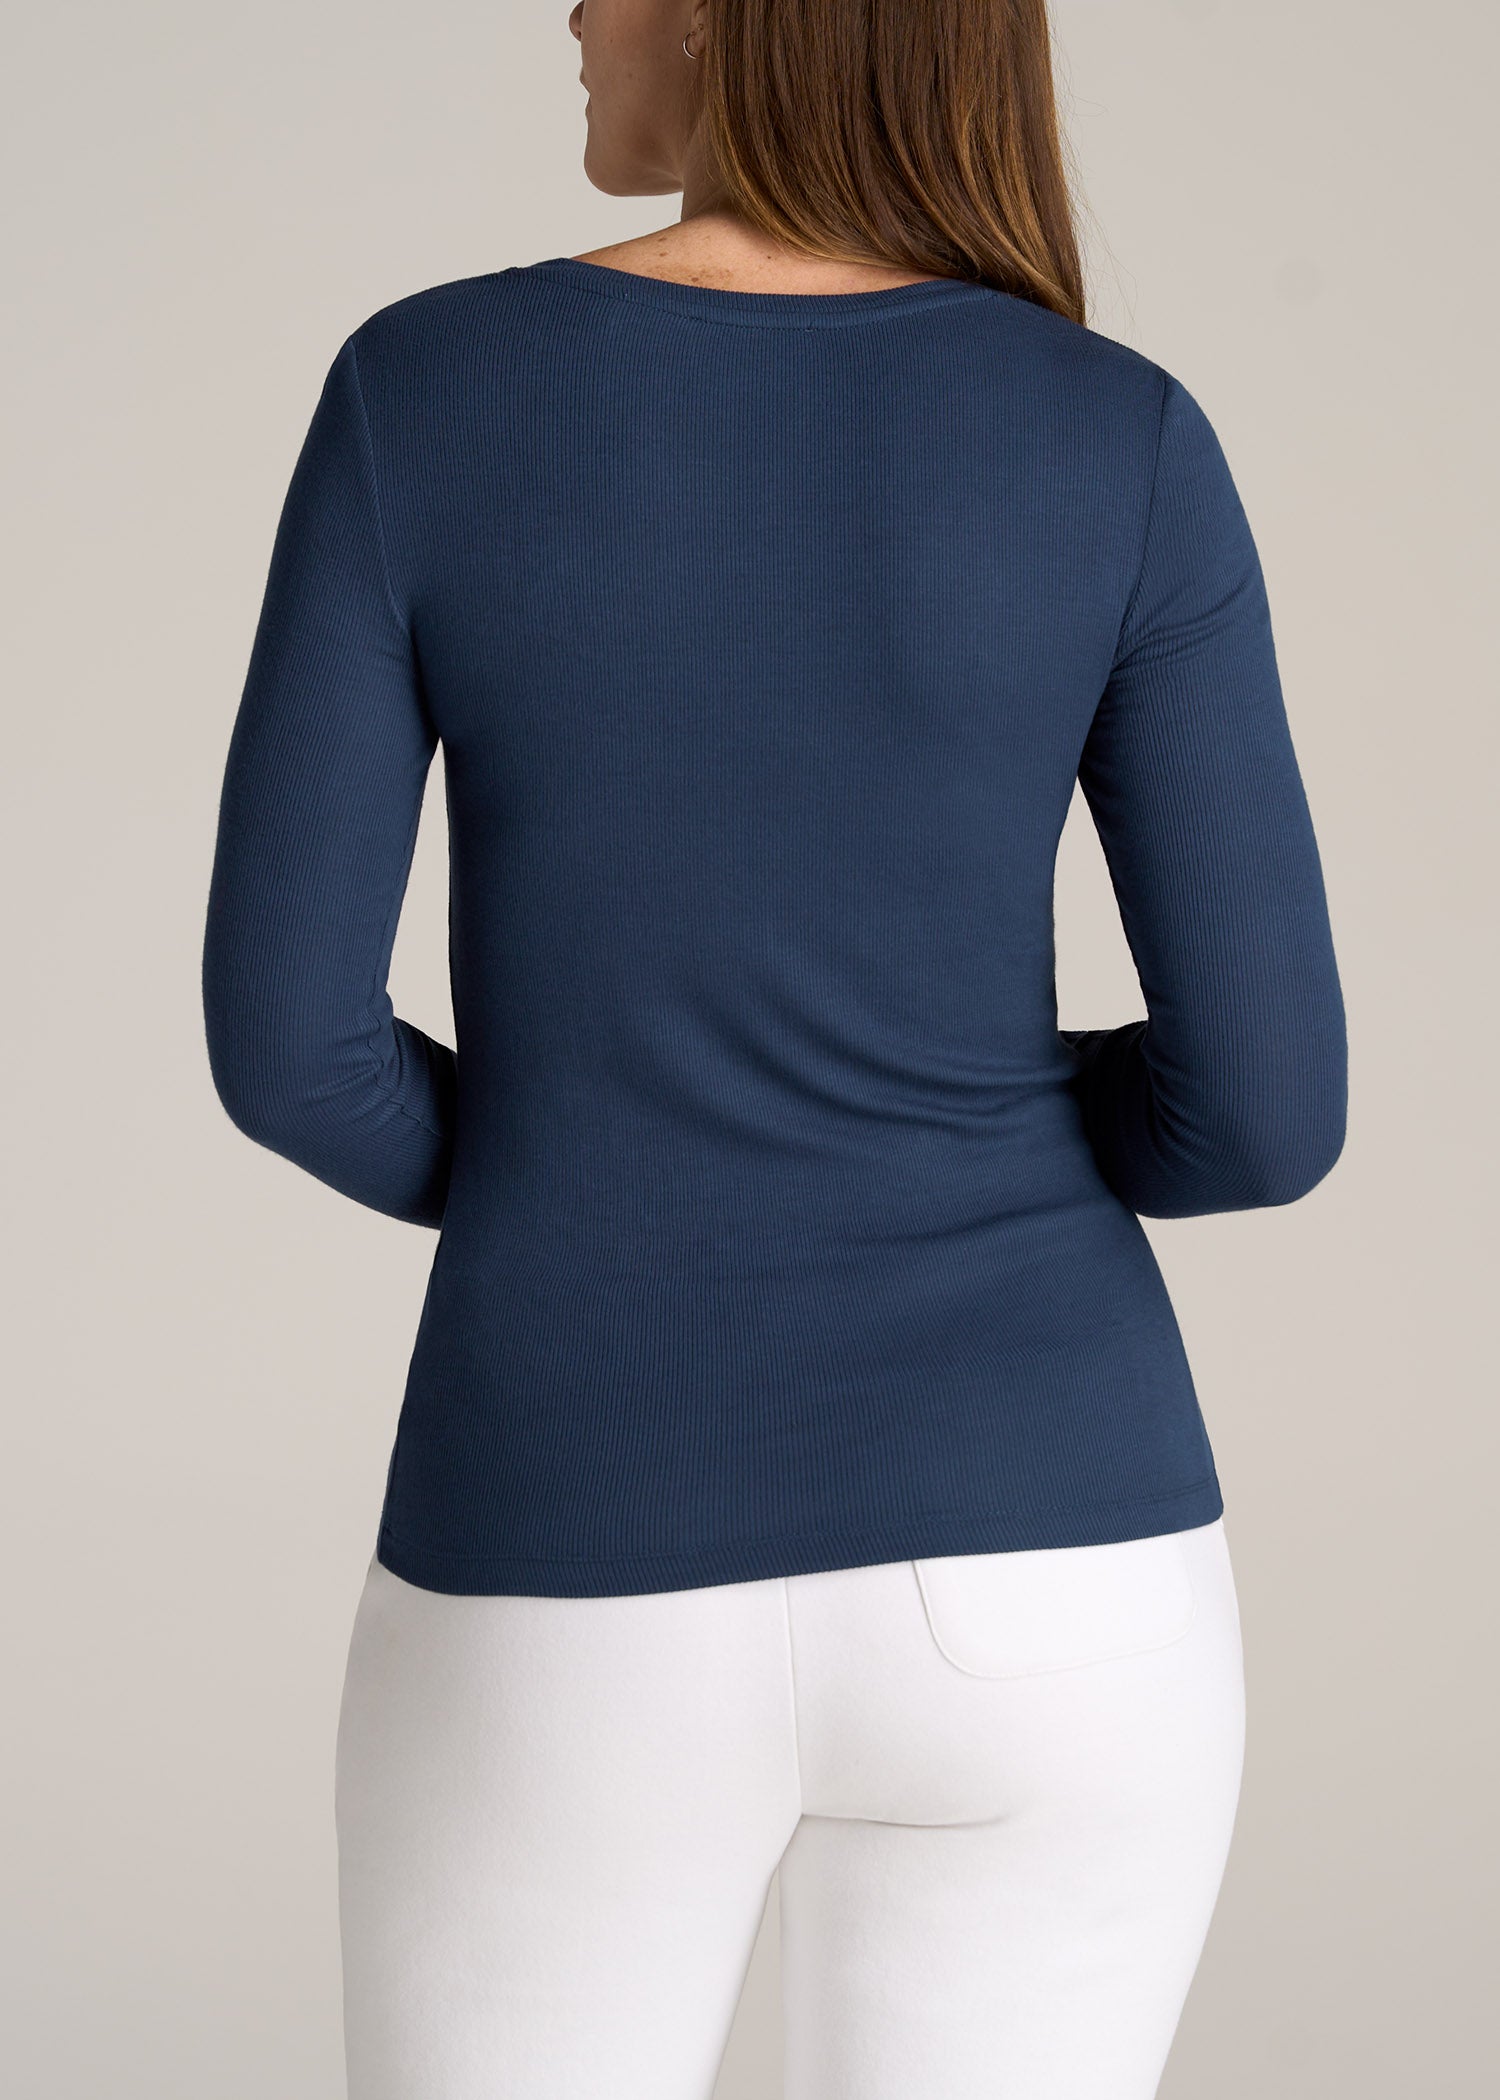 Tall Women's FITTED Ribbed Long Sleeve Henley in Navy